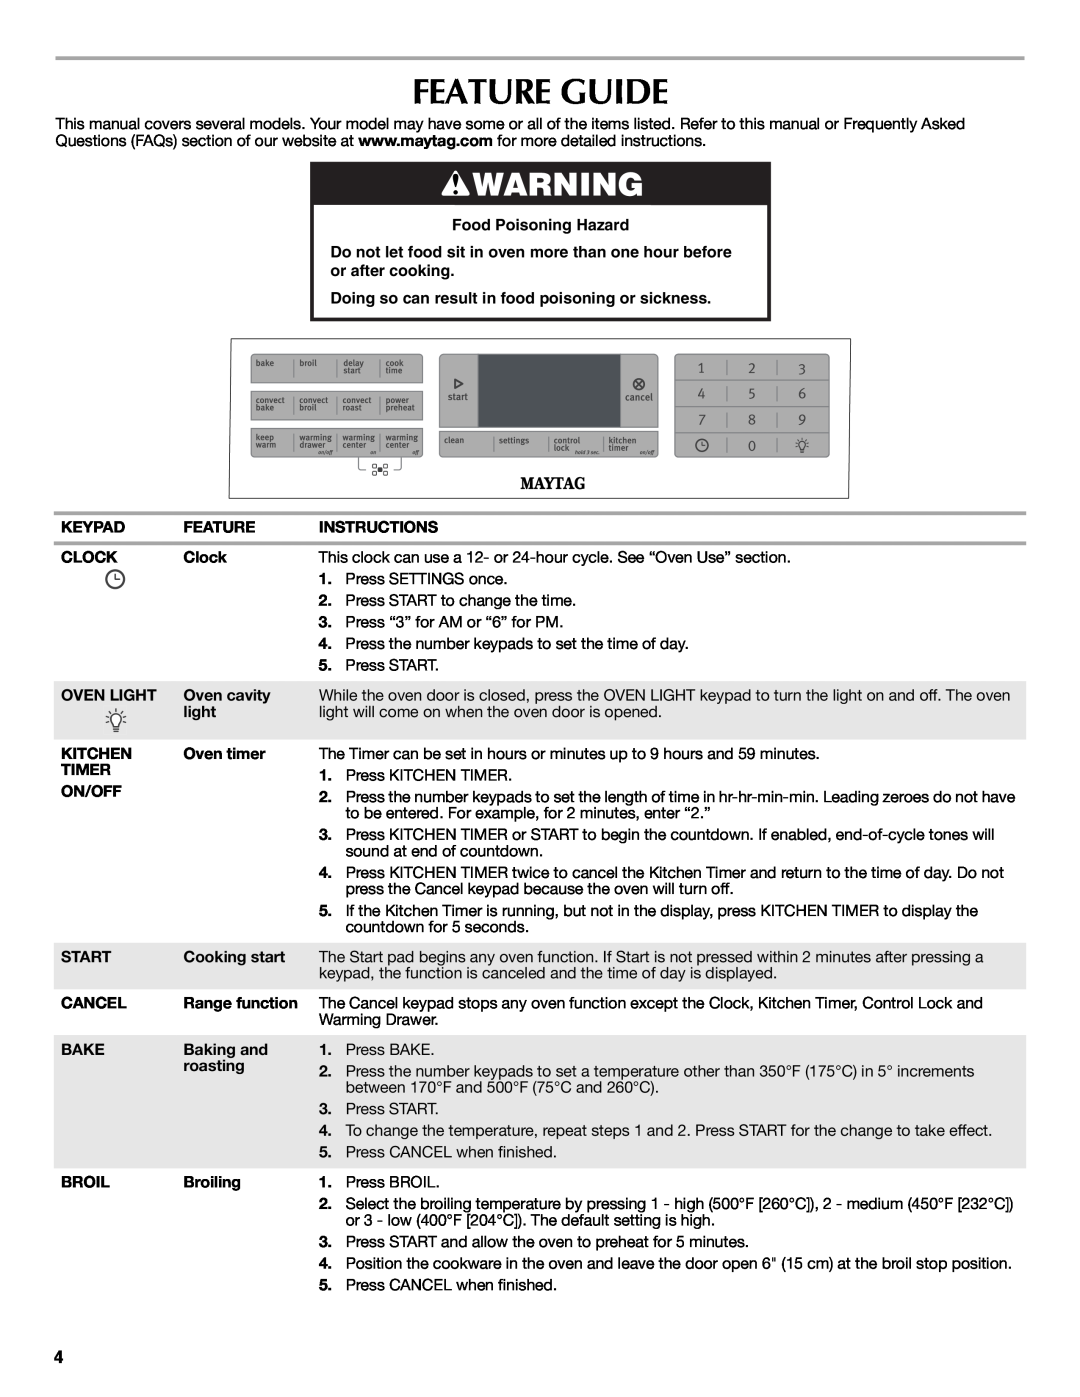 Maytag W10392923C warranty Feature Guide, Food Poisoning Hazard, Doing so can result in food poisoning or sickness 